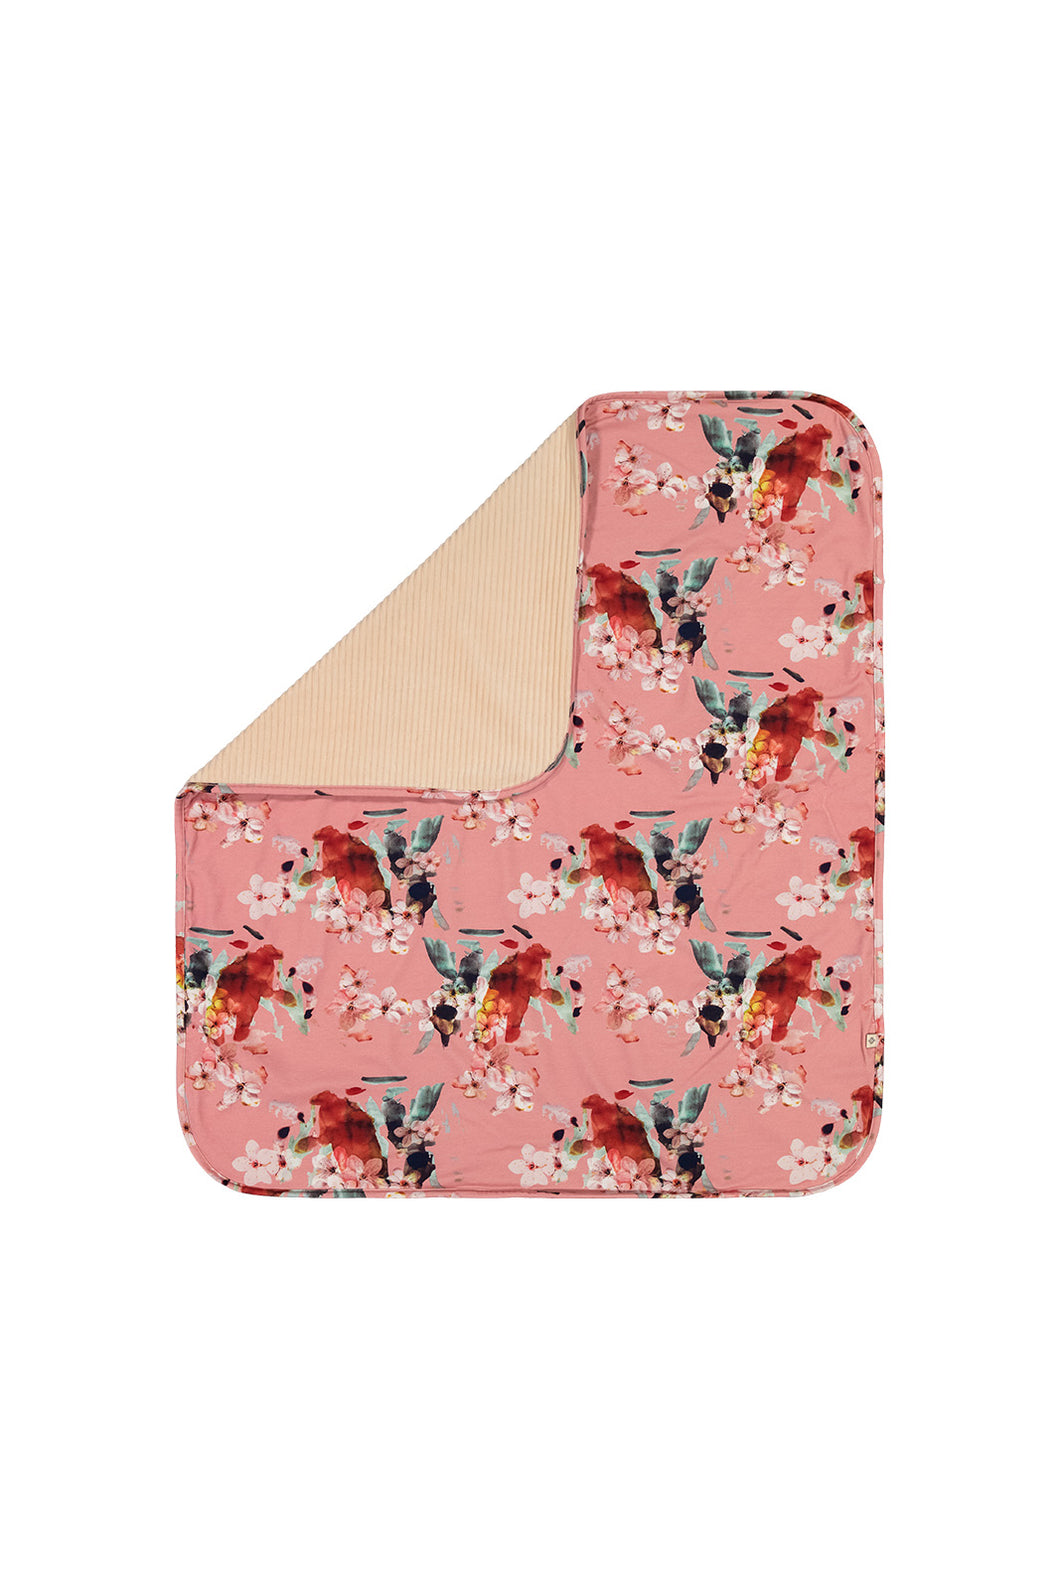 Kaiko Baby Blanket, Pink Blossom